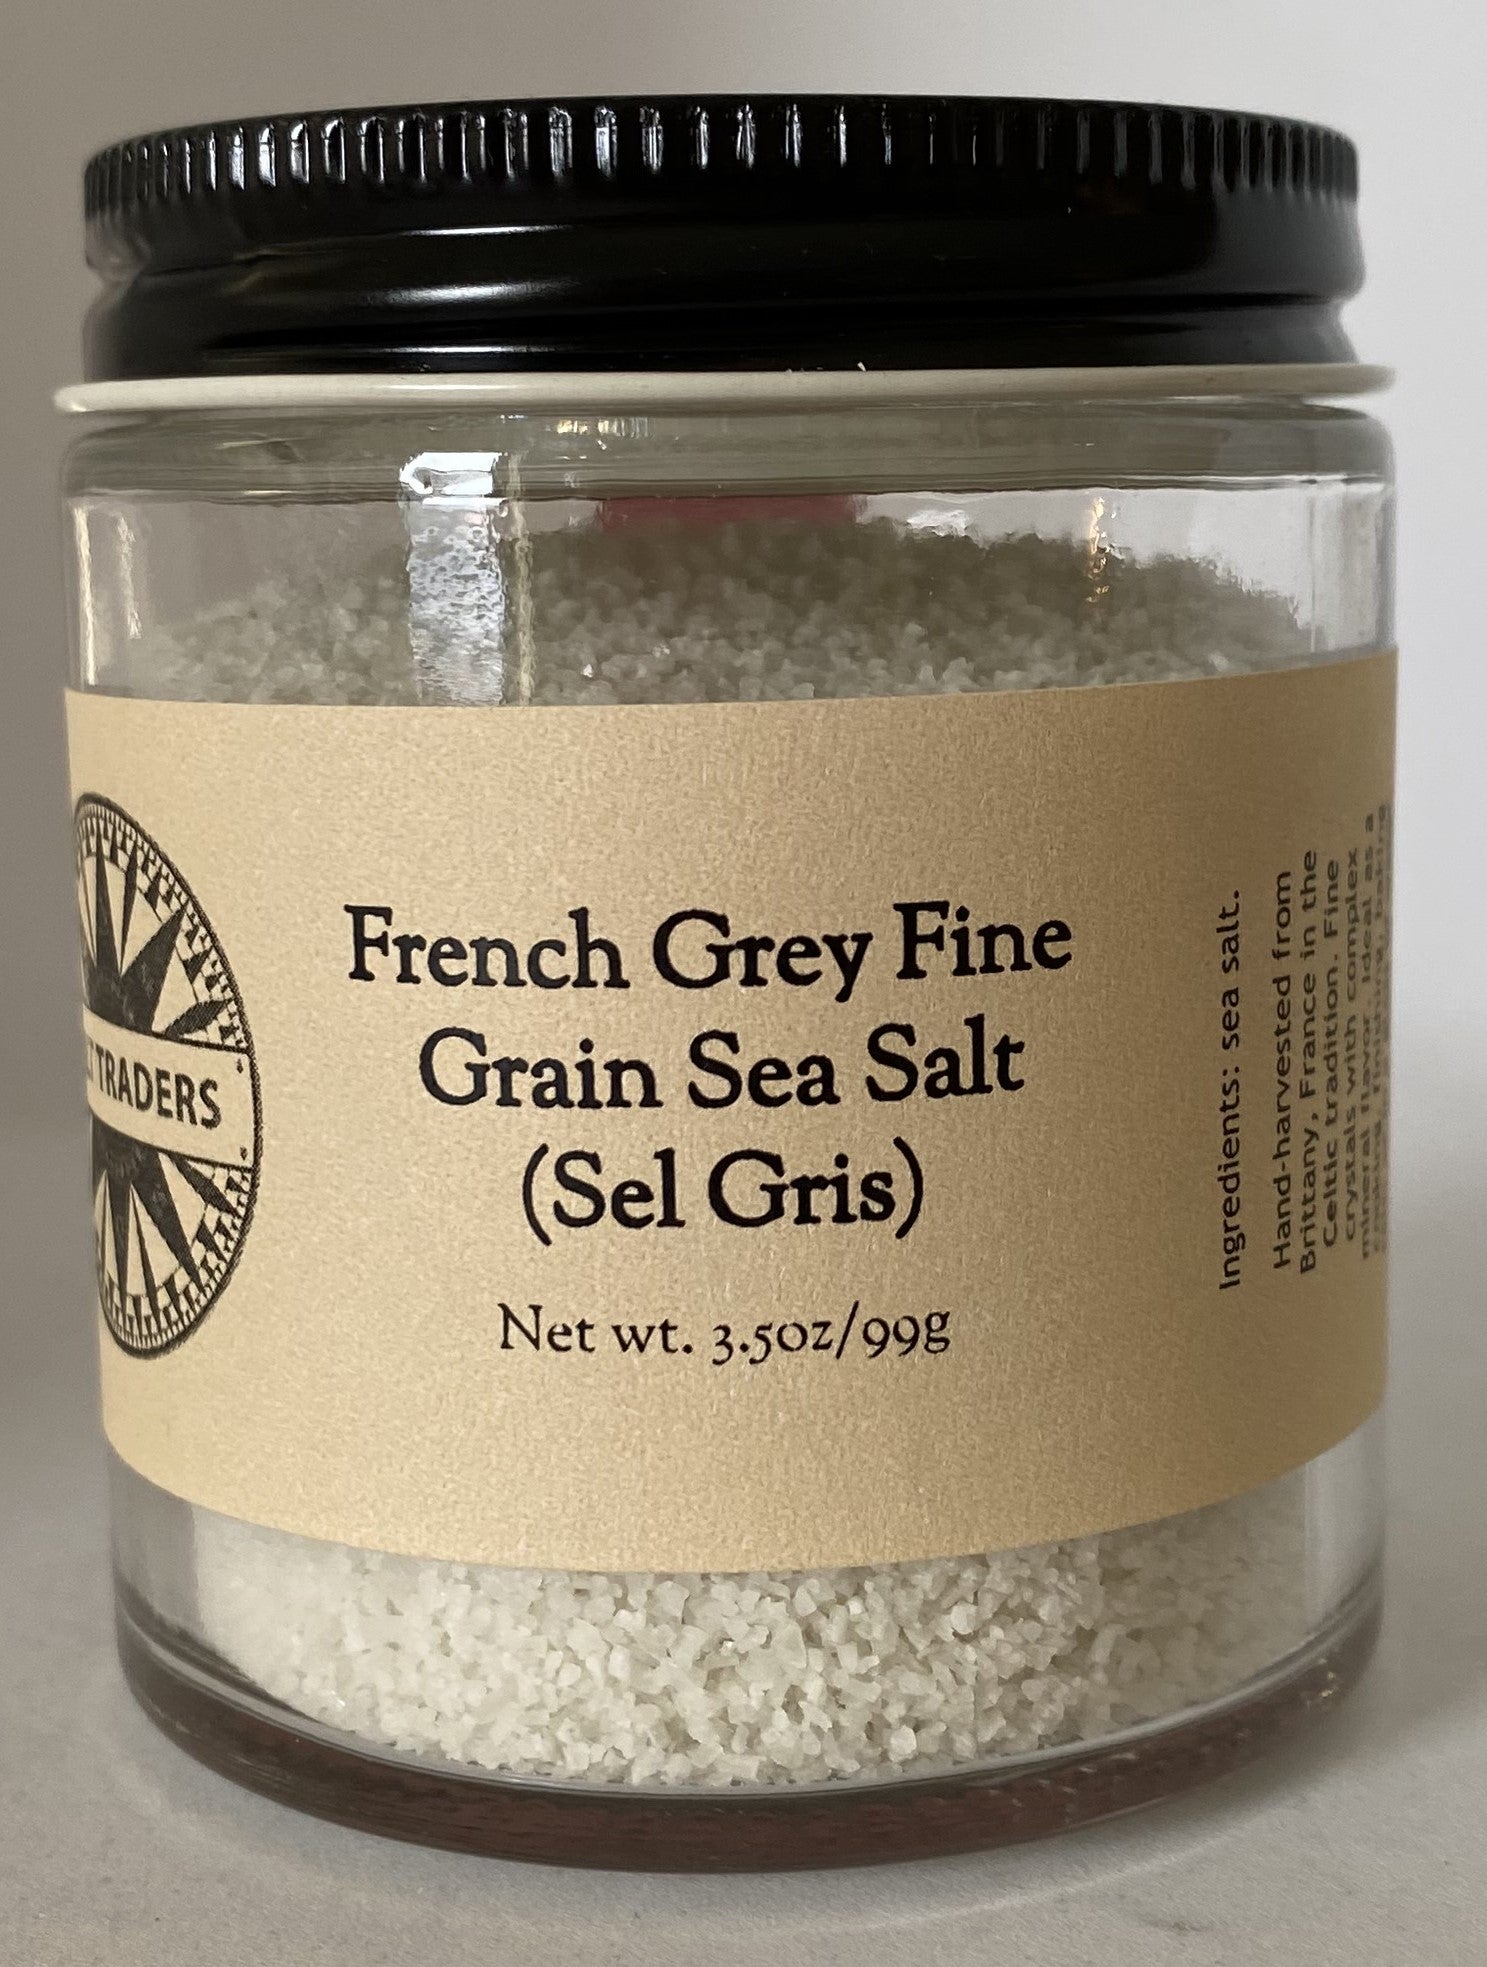 What Is Celtic Sea Salt? Why Sel Gris Is Unhealthy